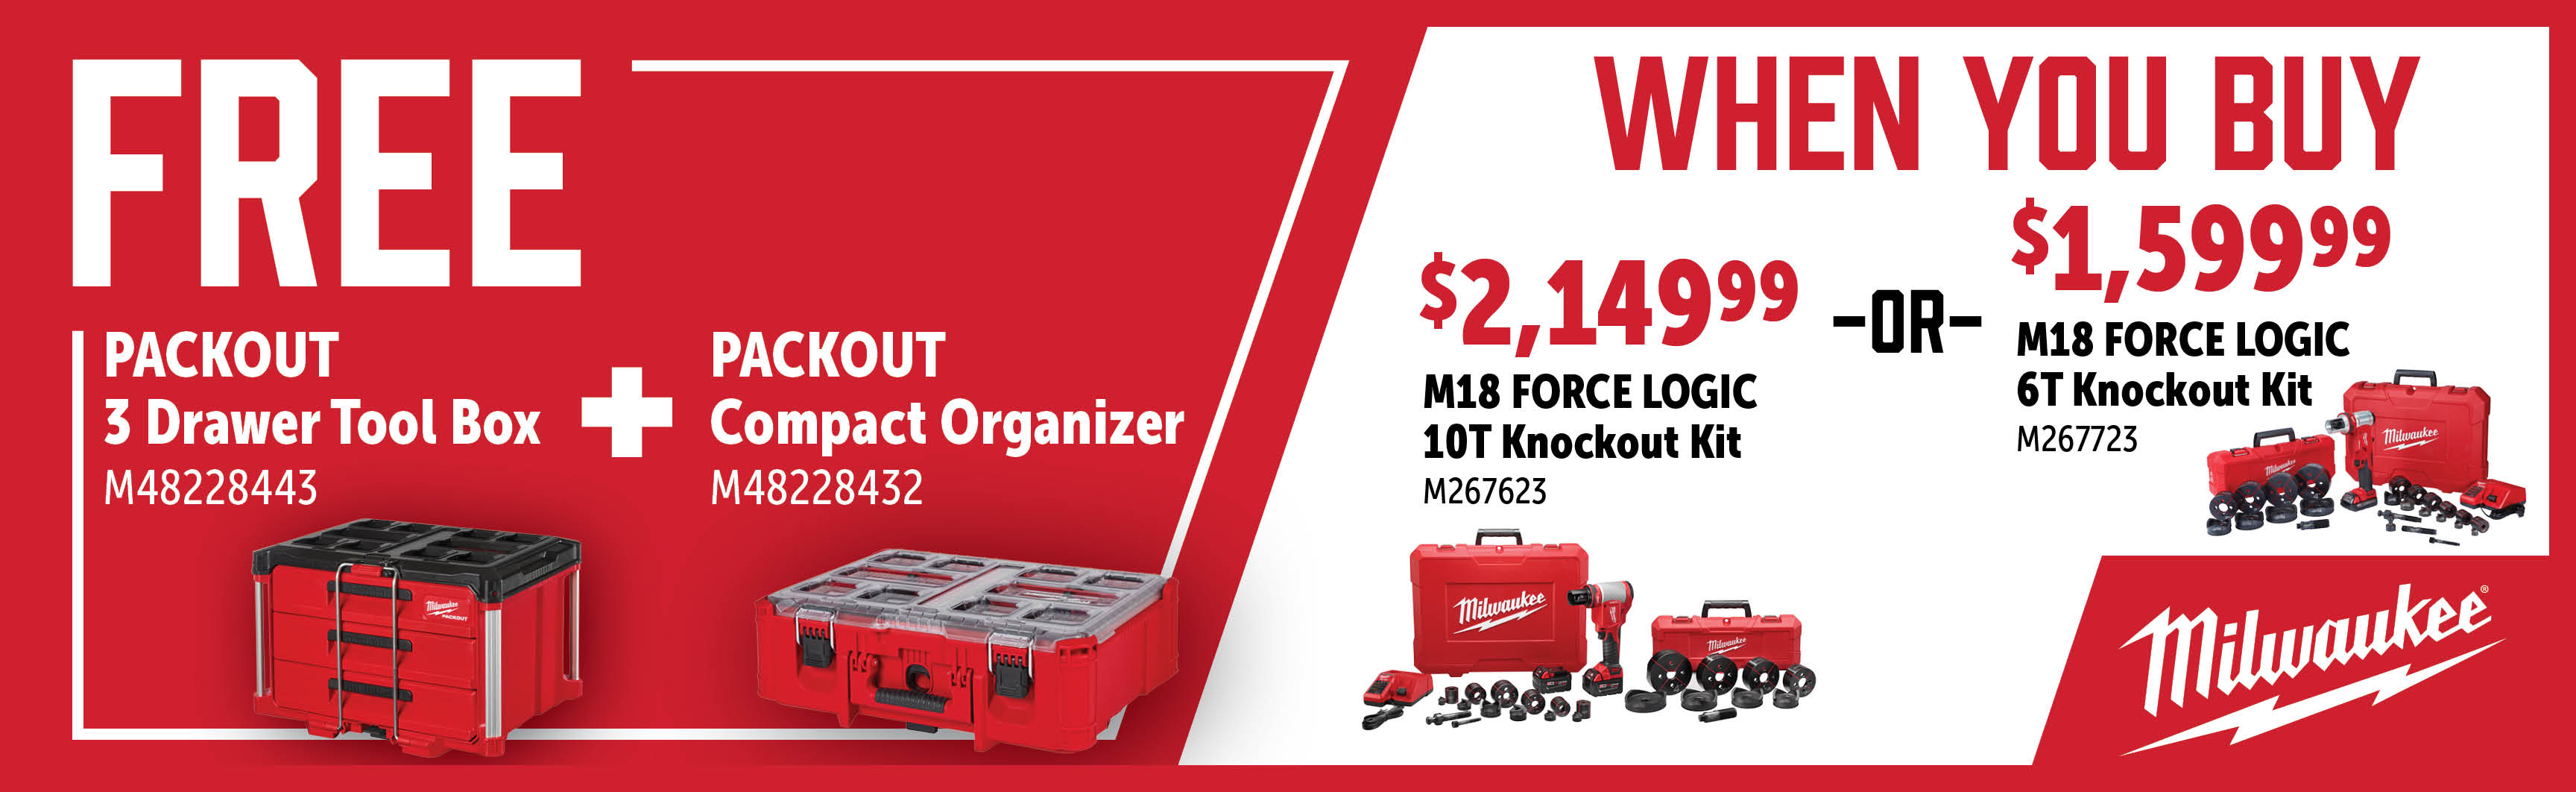 Milwaukee Aug-Oct: Buy a M267723 or M267623 and Get a Free M48228443 + M48228435